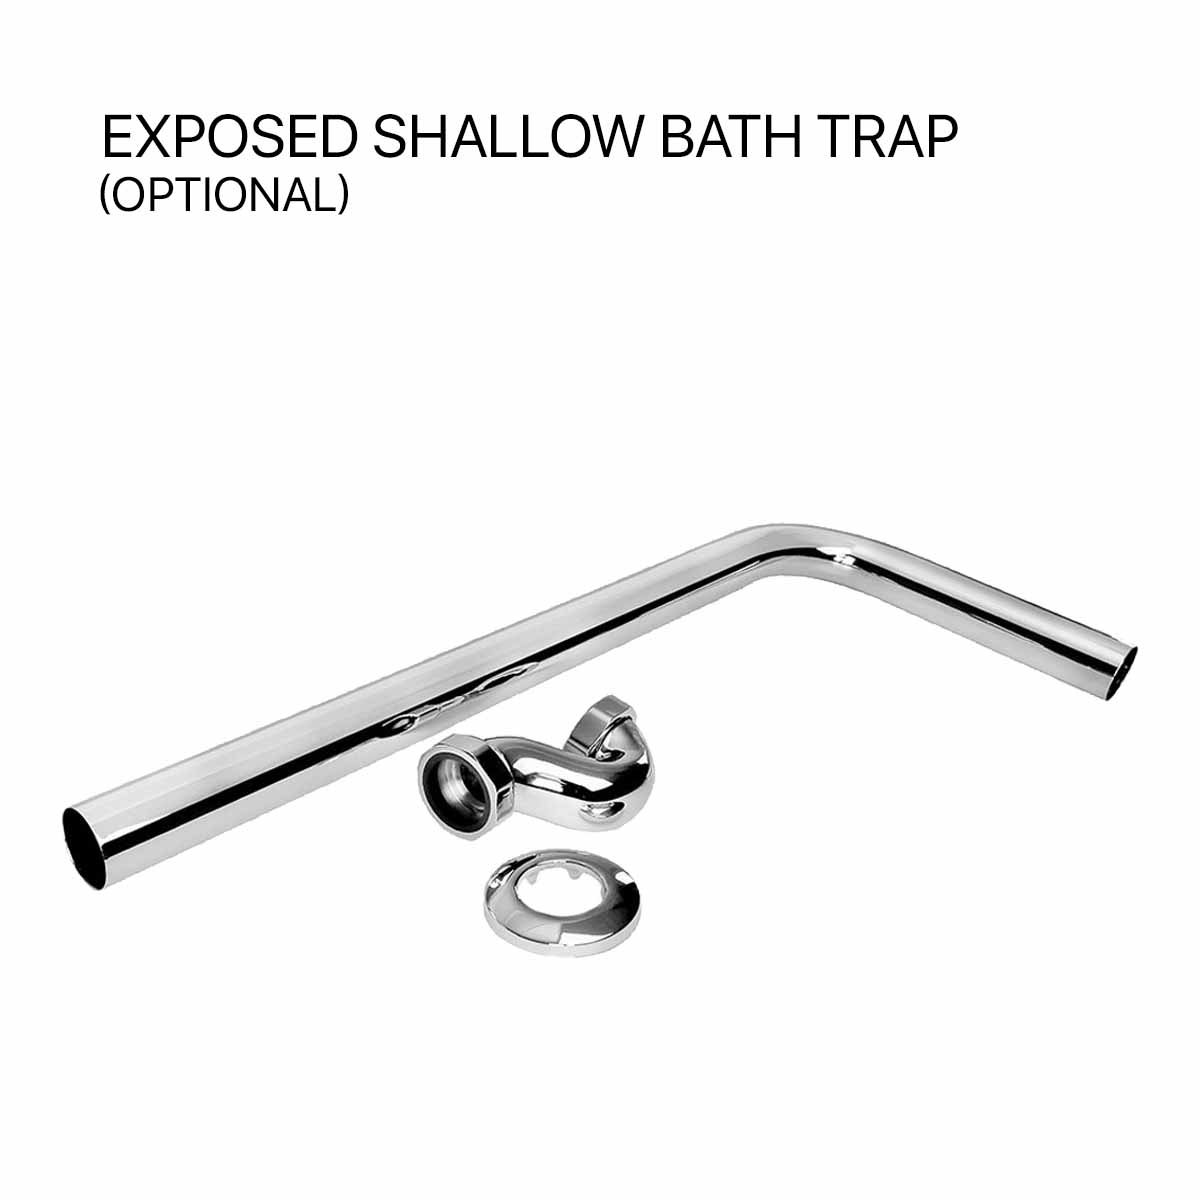 Heritage Essex Single Ended Cast Iron Freestanding Bath Exposed Shallow Bath Trap